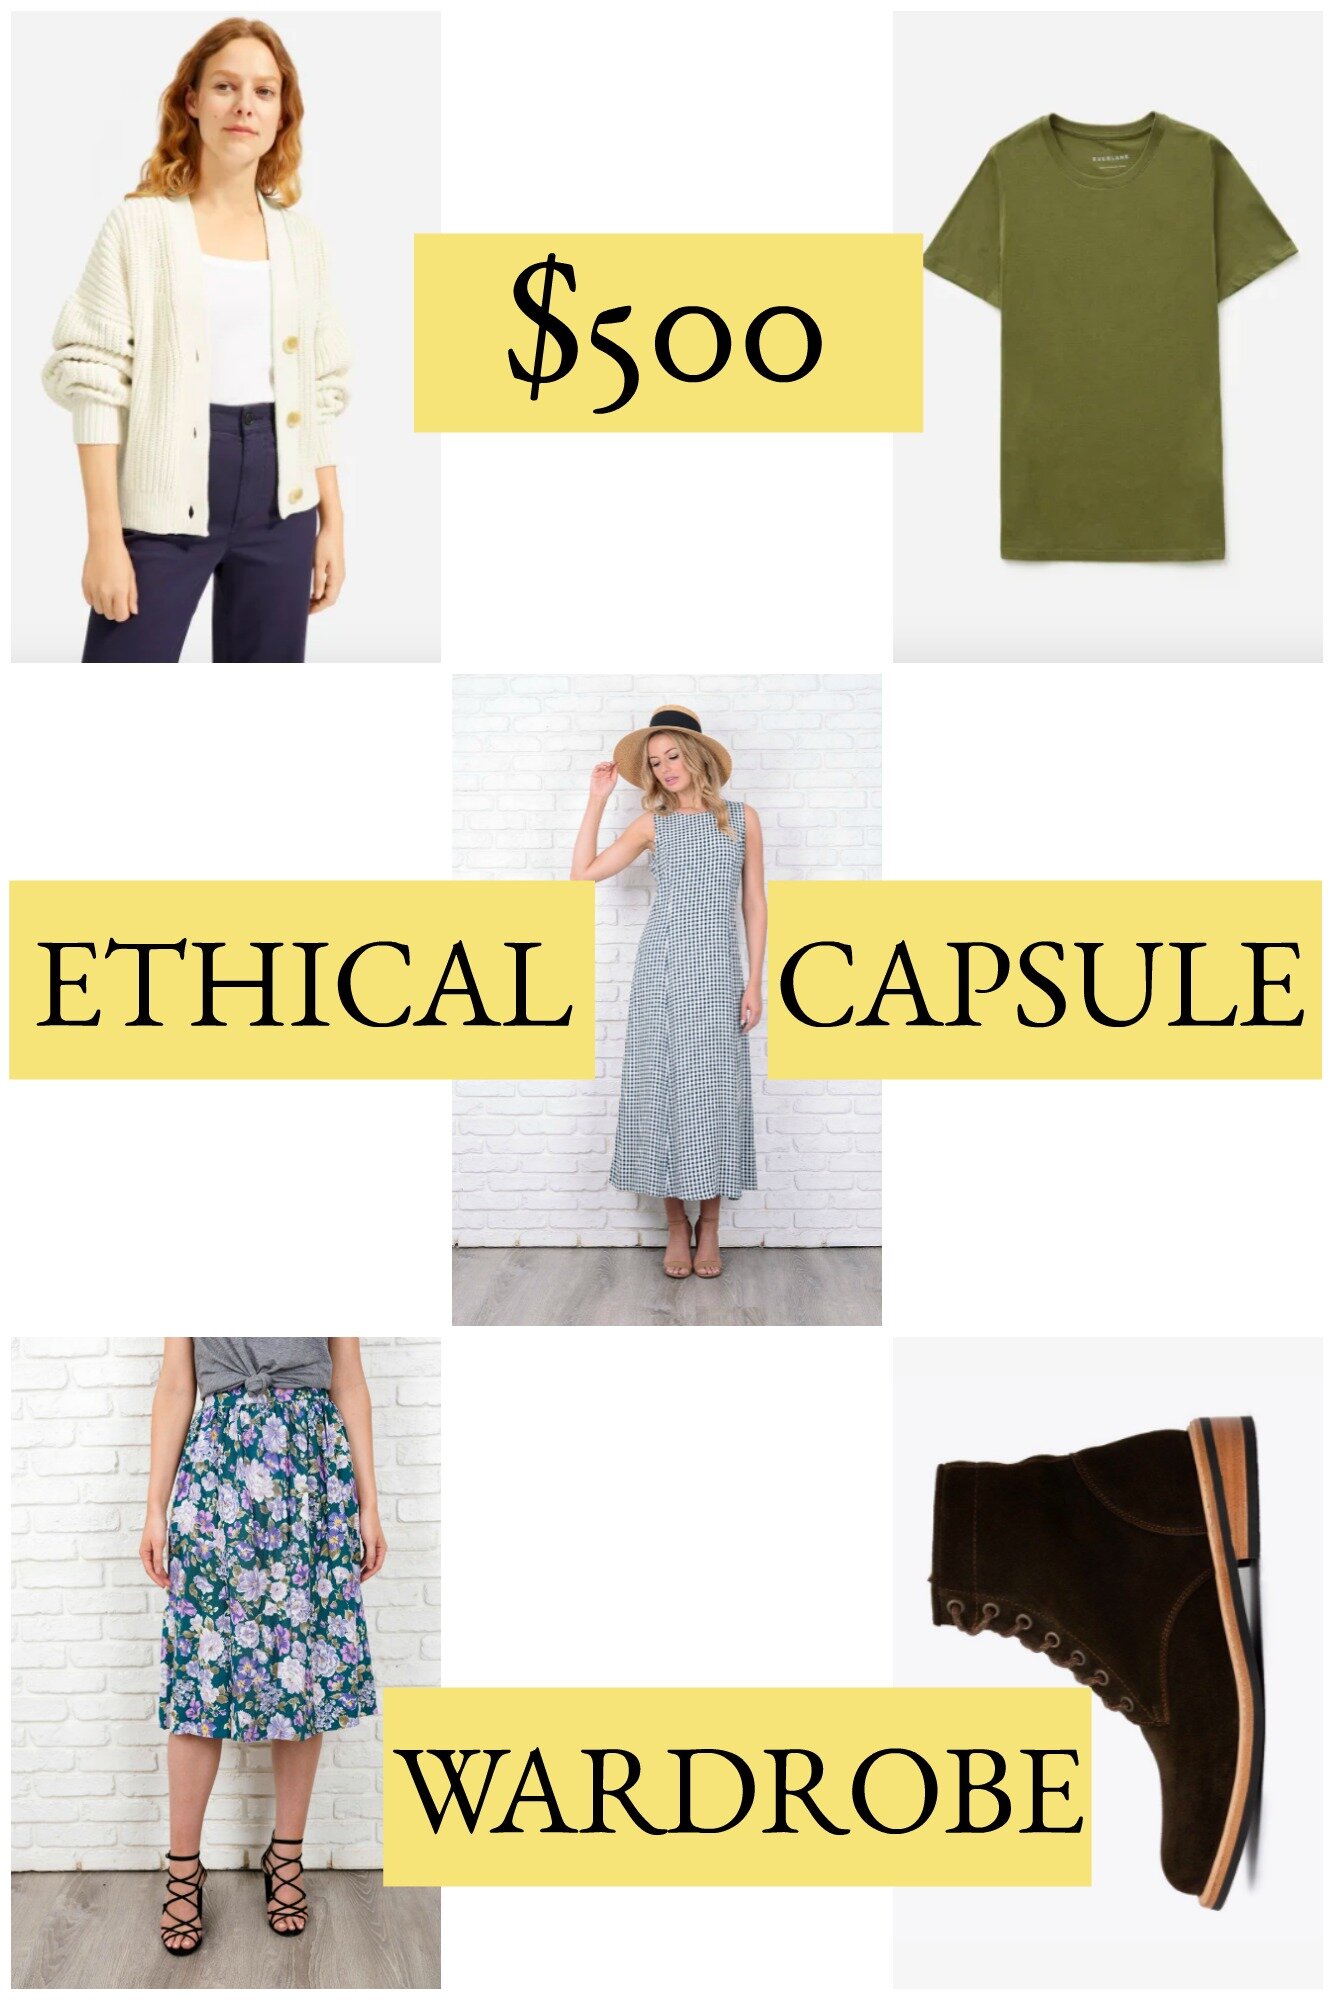 pinterest graphic with product images and text that reads "$500 Ethical Capsule Wardrobe"